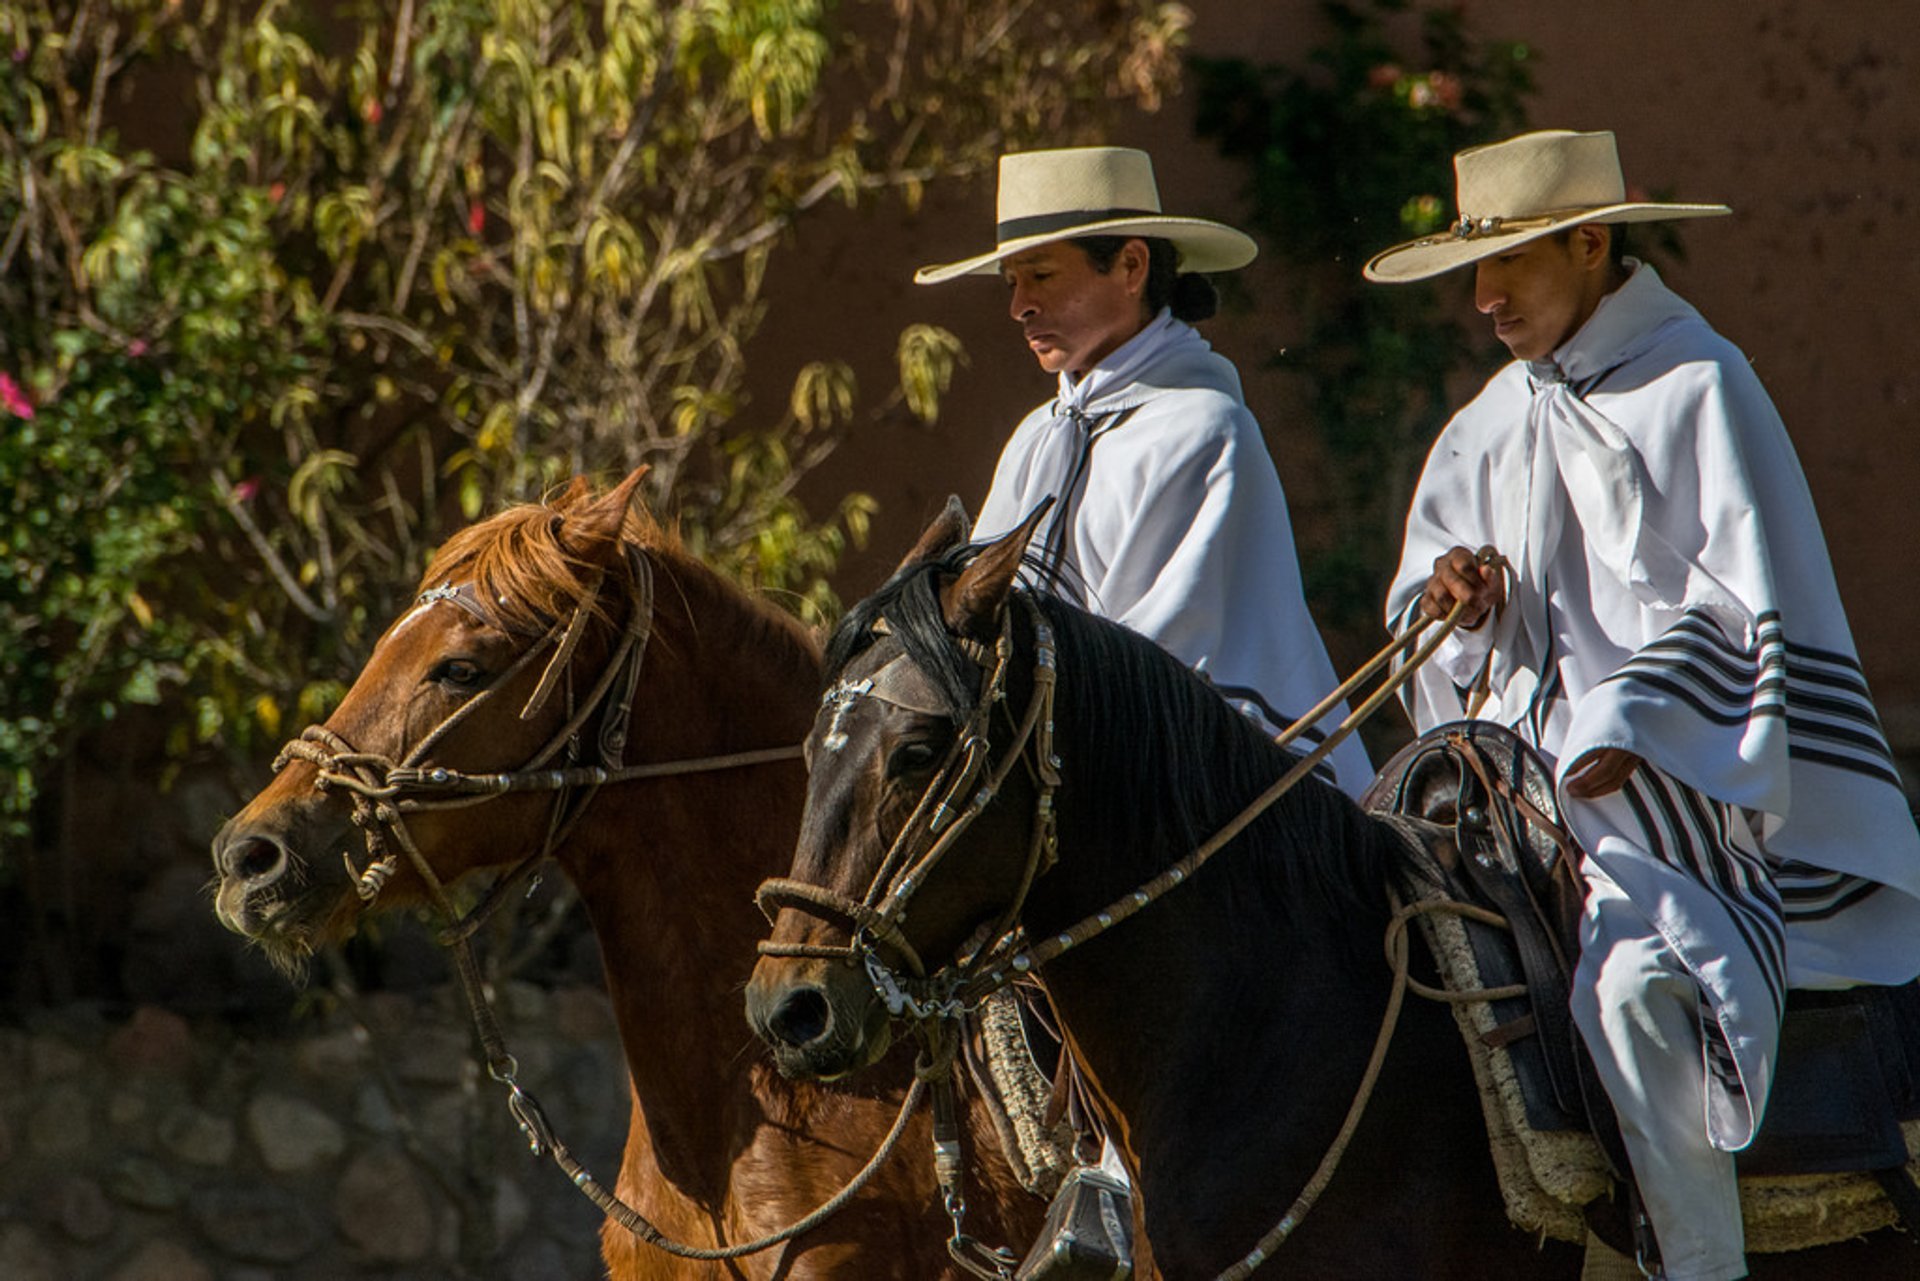 Peruvian Paso Horse Competitions